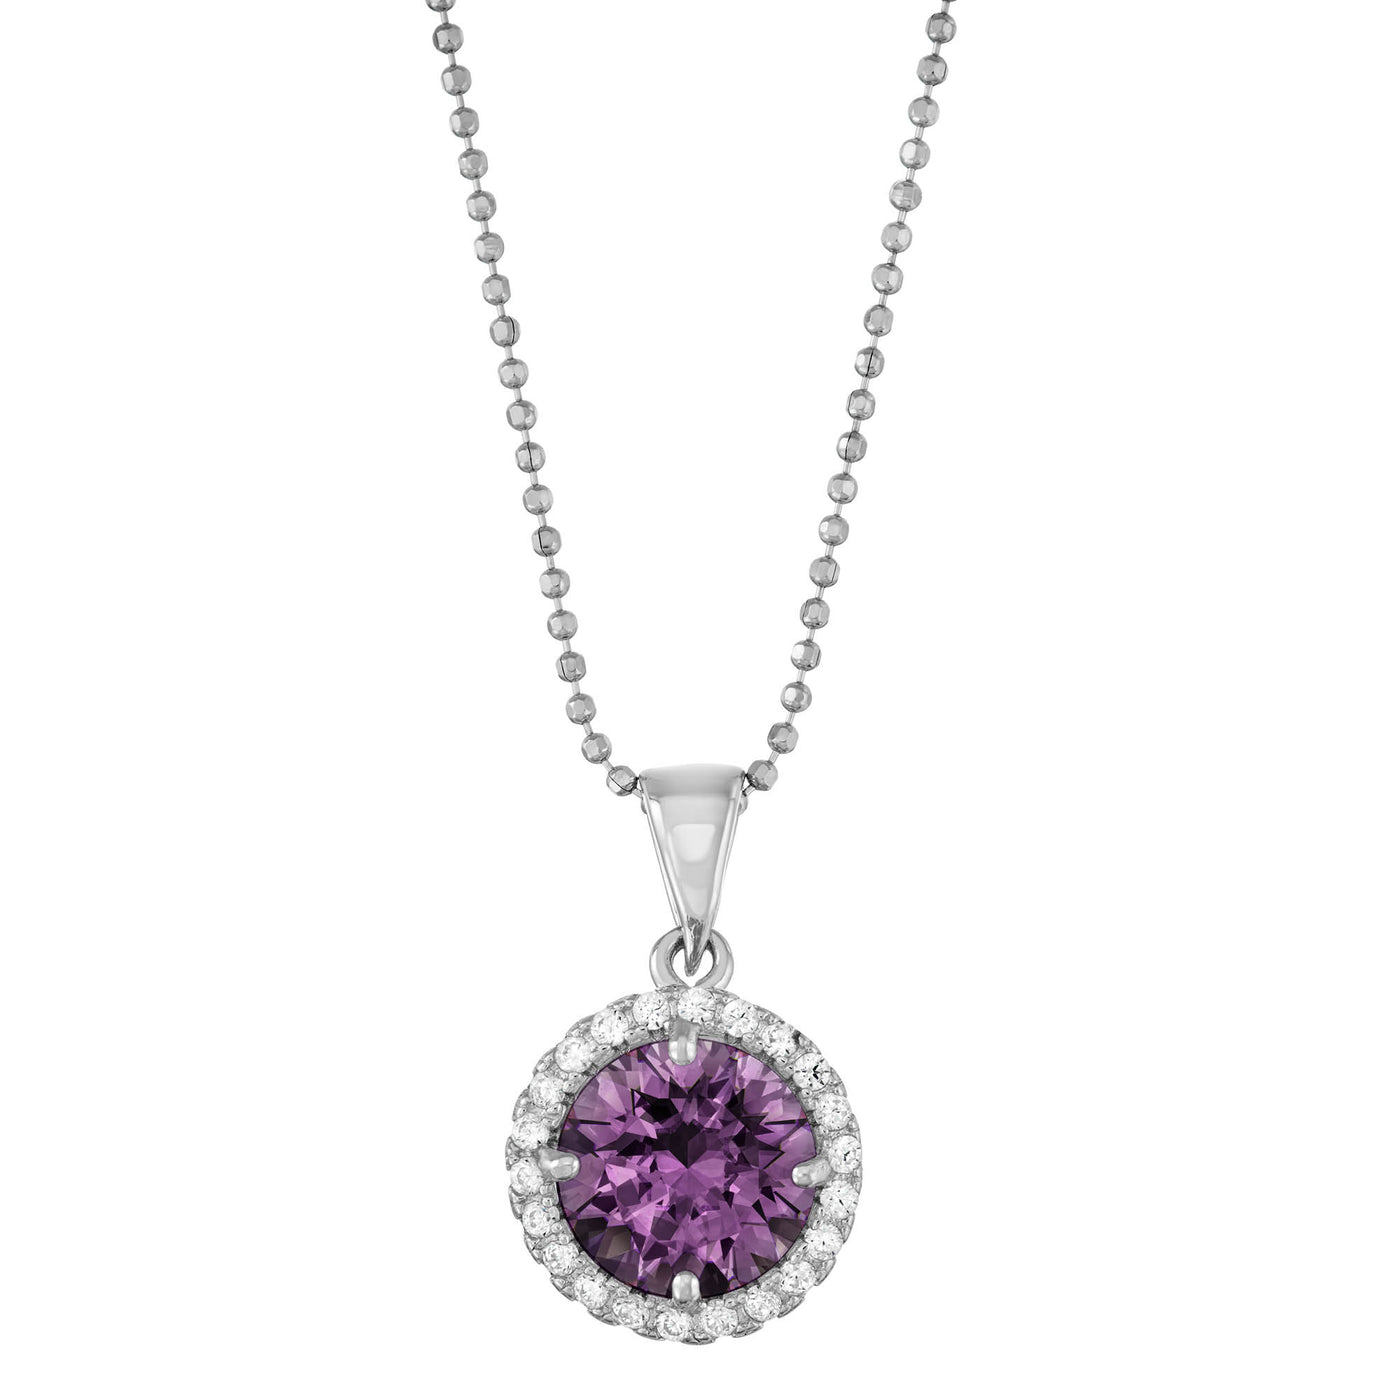 Rebecca Sloane Silver Circle with Faceted Amethyst CZ Pendant